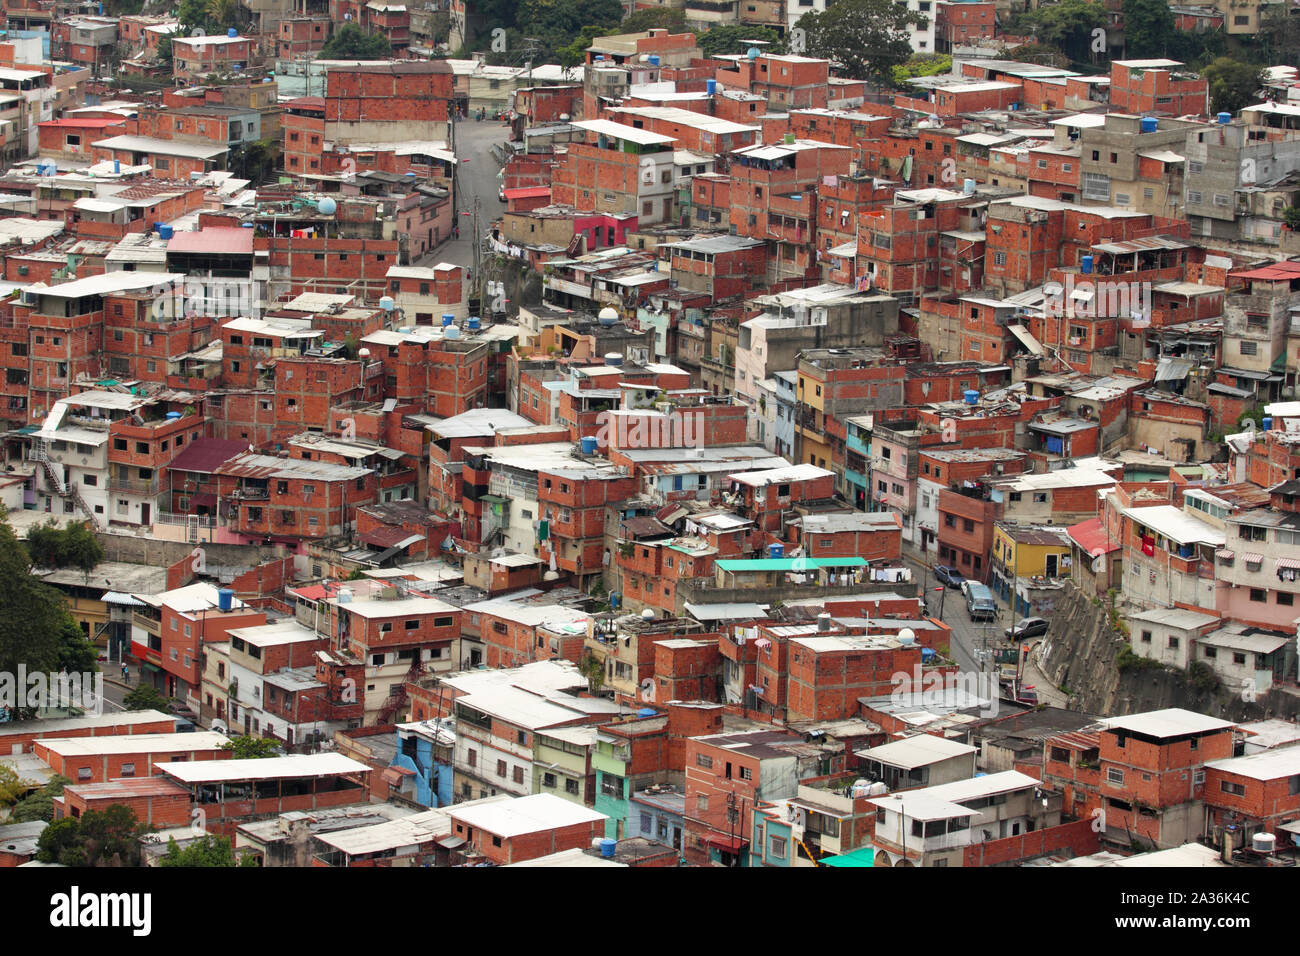 Simple houses or ranchos in Caracas, Venezuela. Ranchos are the forms of informal poor housing that cover the hills surrounding the city Stock Photo